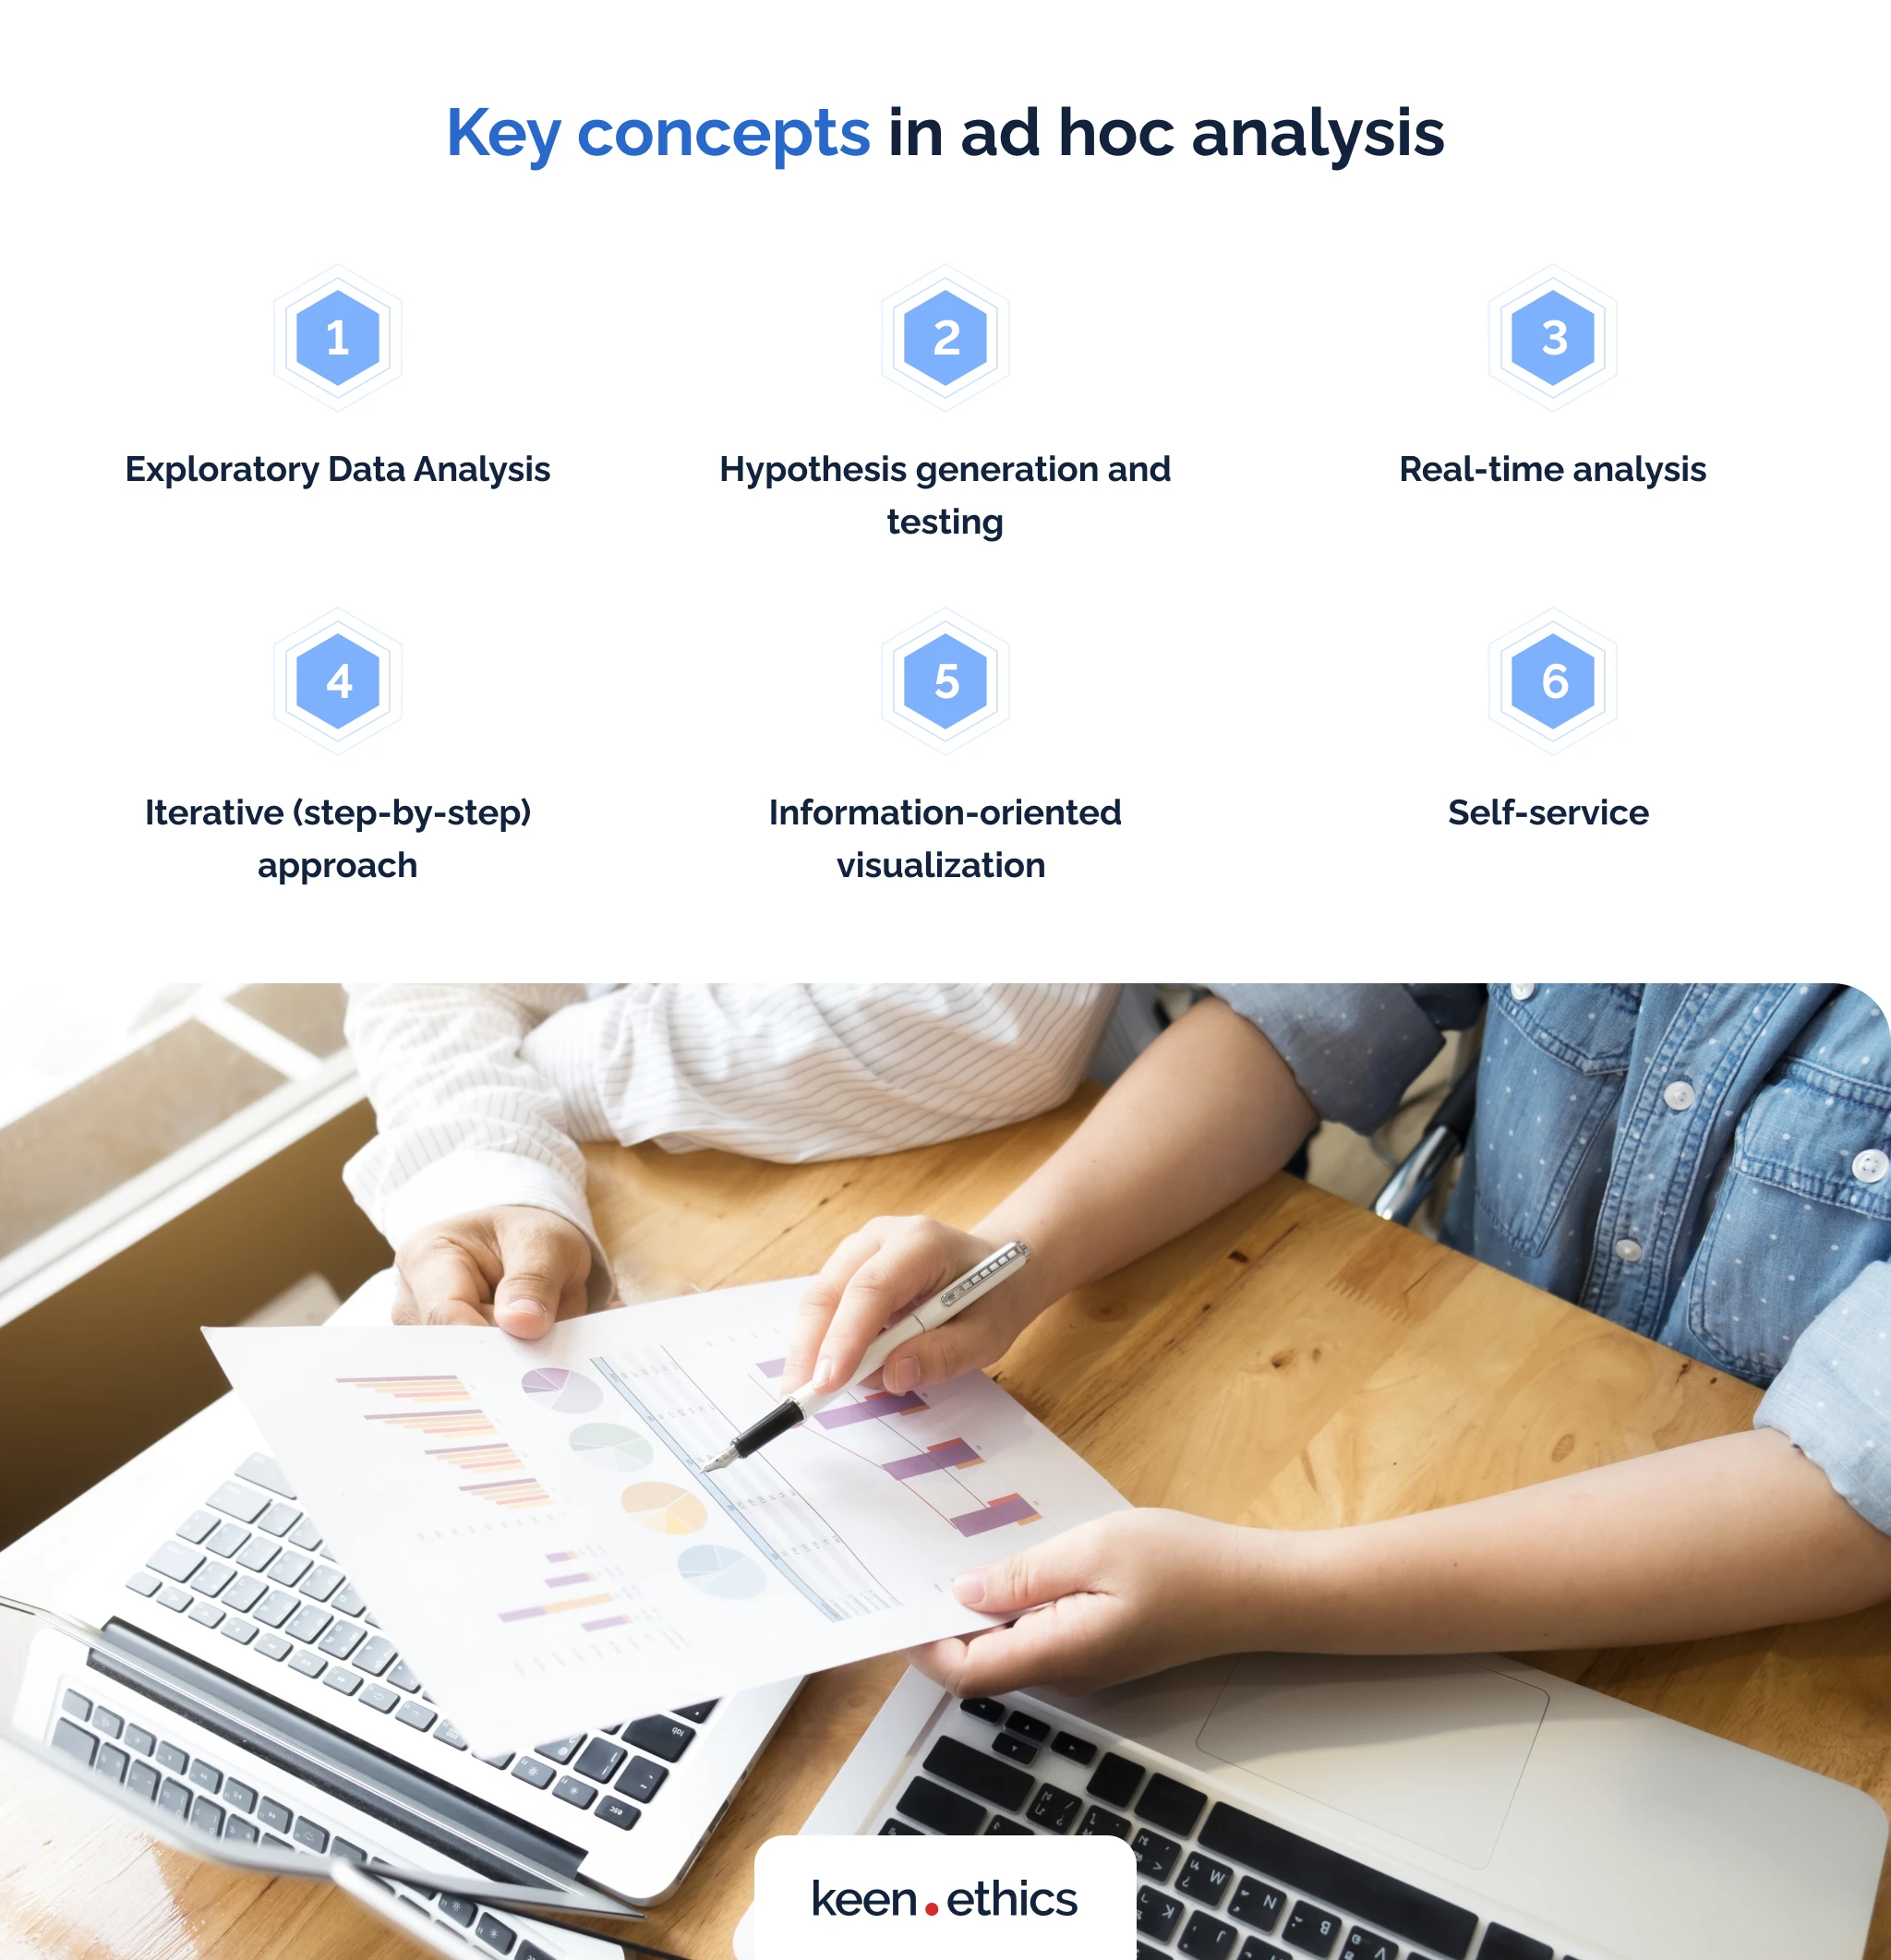 Key concepts in ad hoc analysis